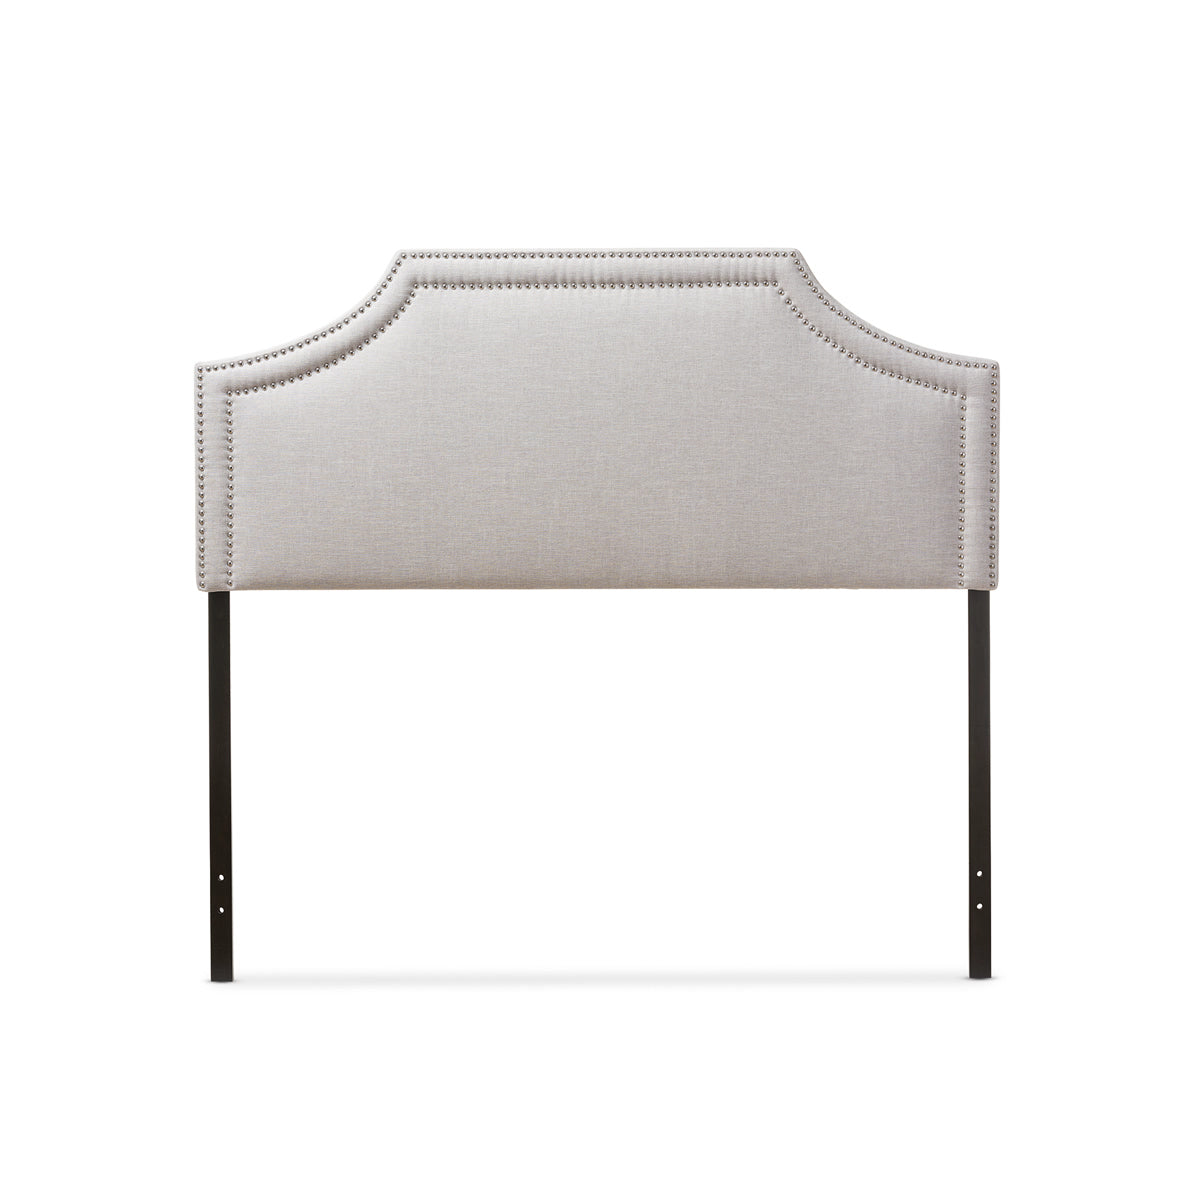 Baxton Studio Avignon Modern and Contemporary Grayish Beige Fabric Upholstered Queen Size Headboard Baxton Studio-Queen Headboard-Minimal And Modern - 2